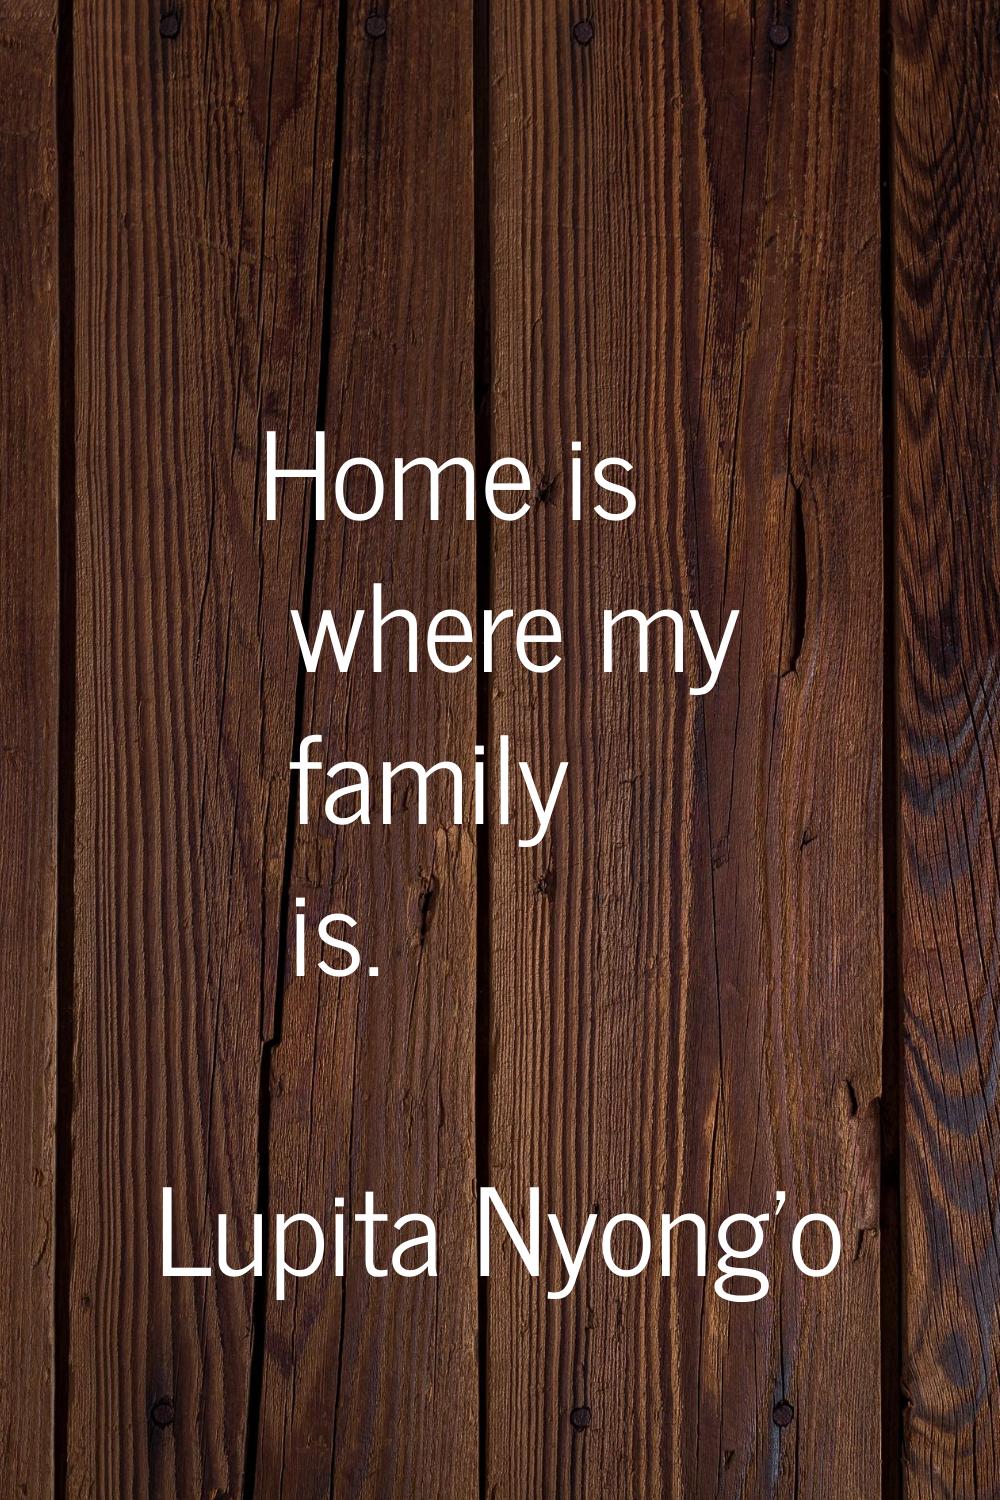 Home is where my family is.